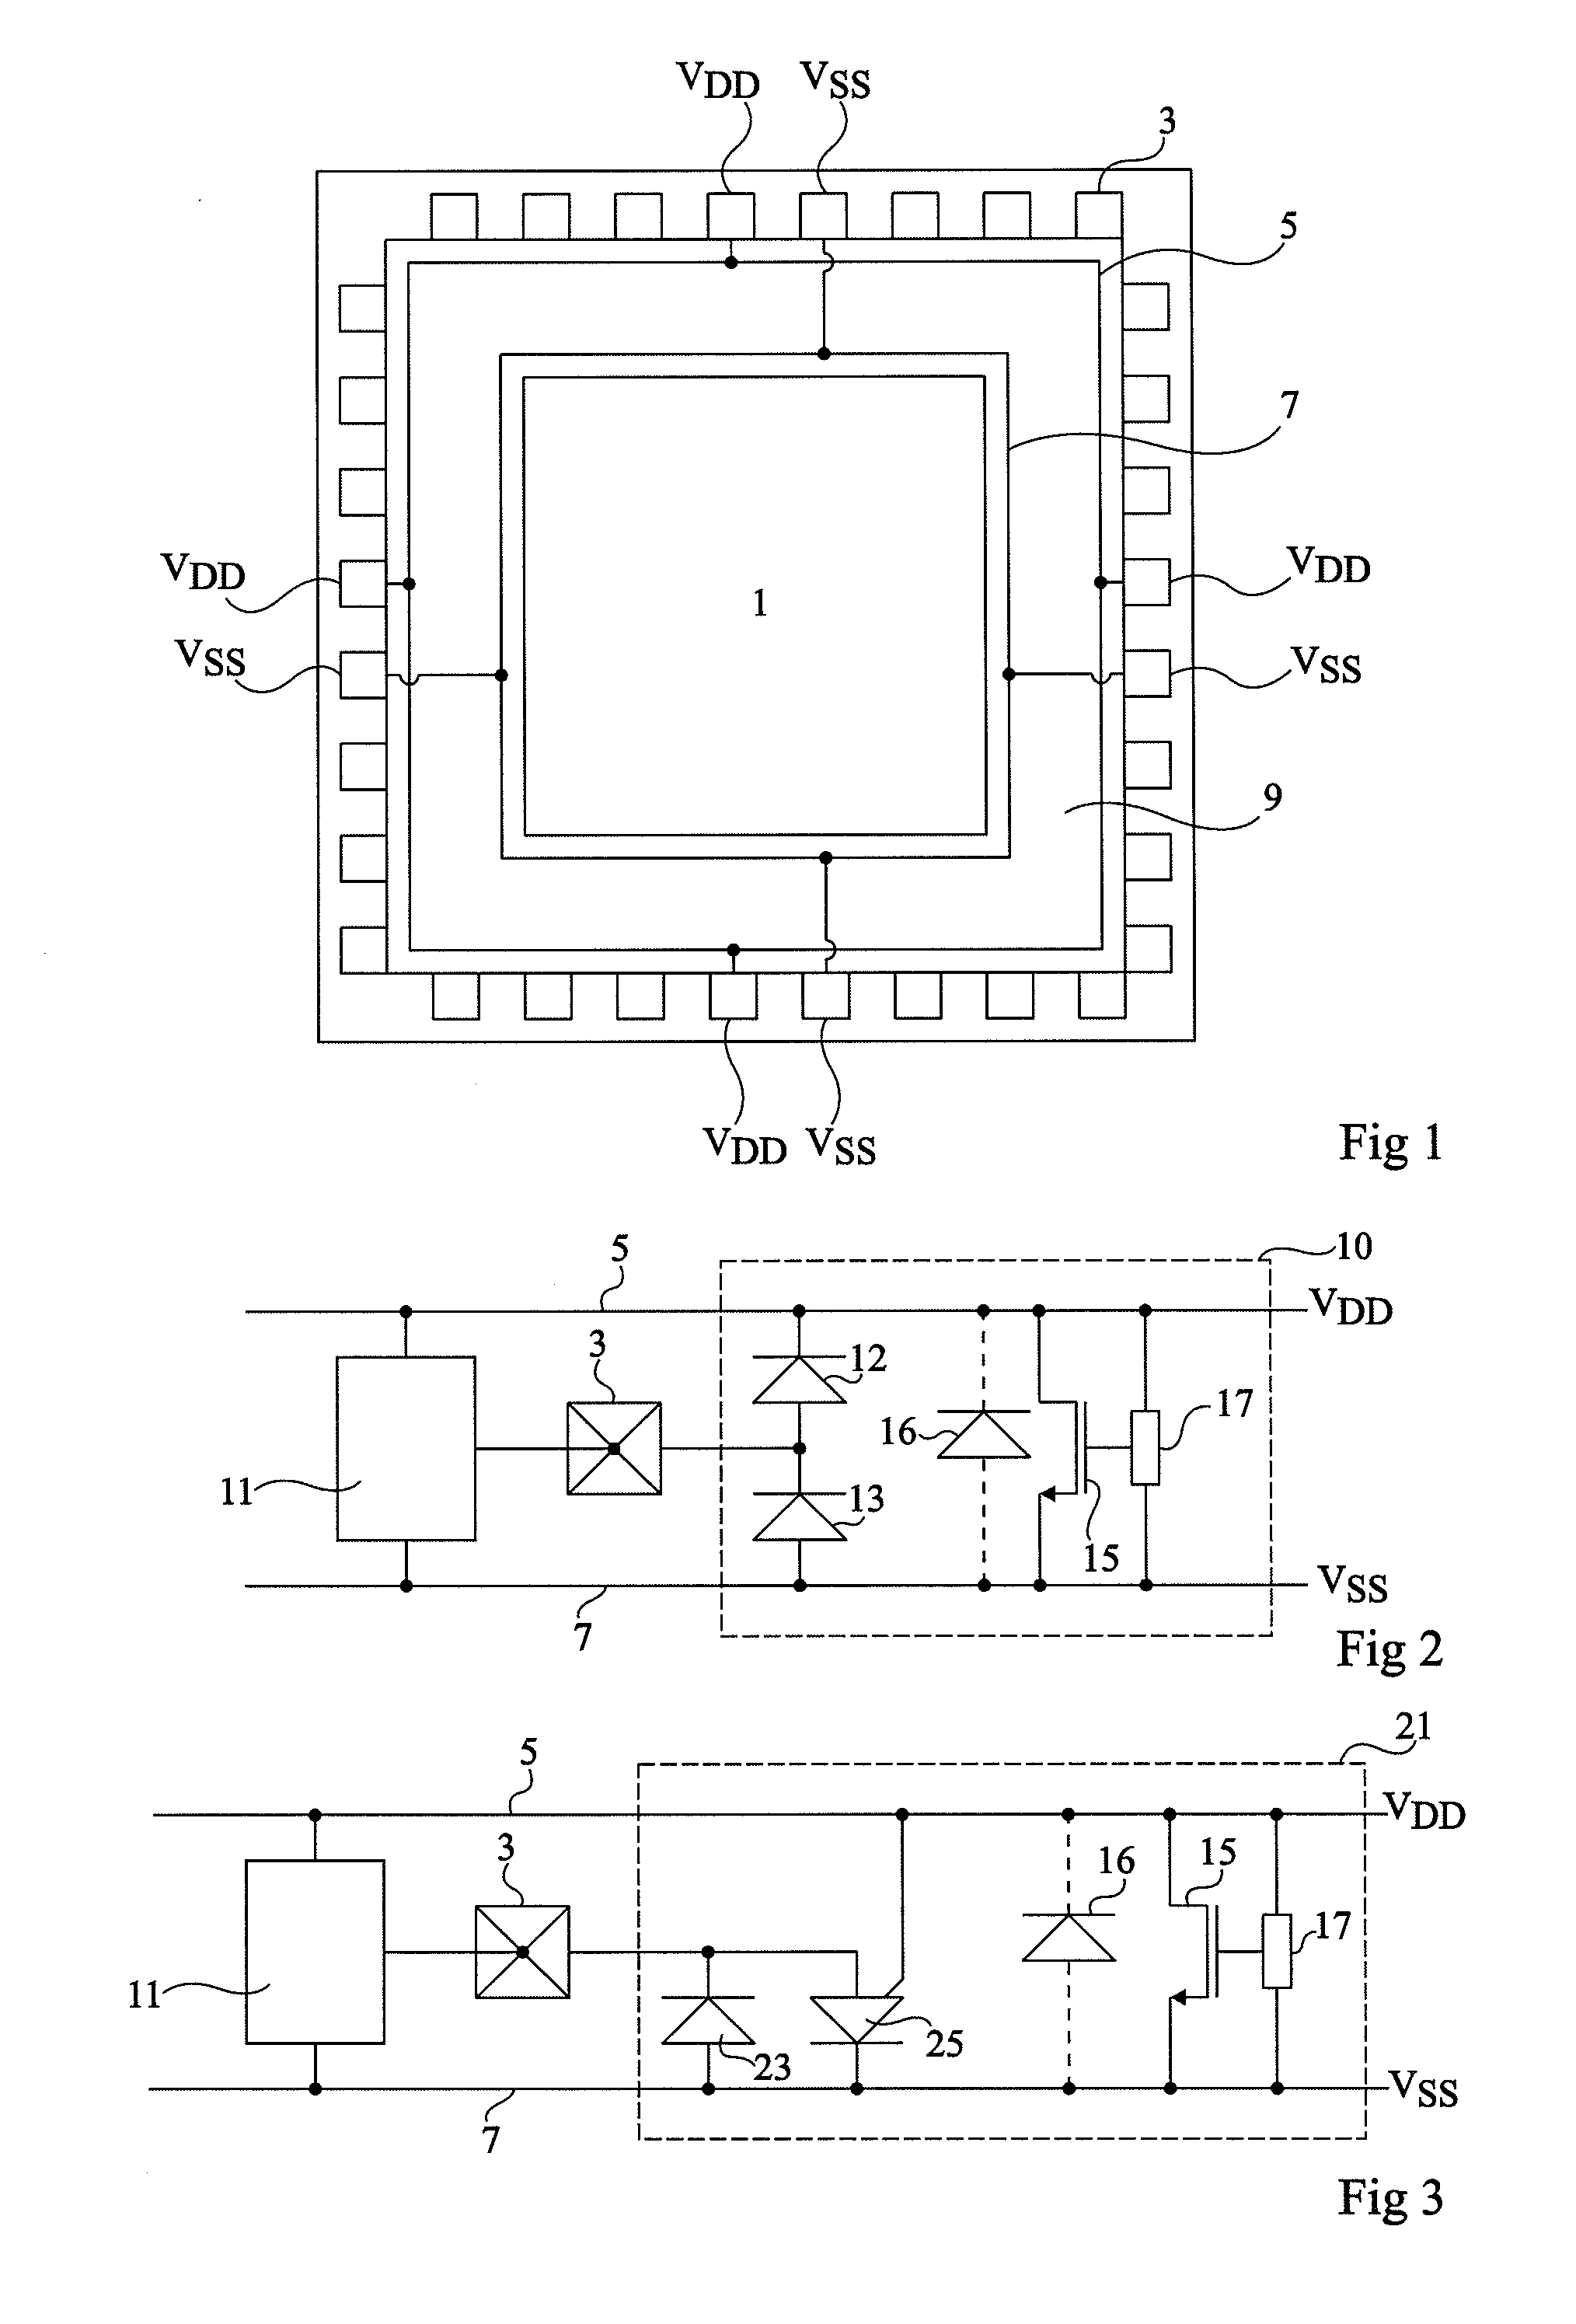 Structure for protecting an integrated circuit against electrostatic discharges